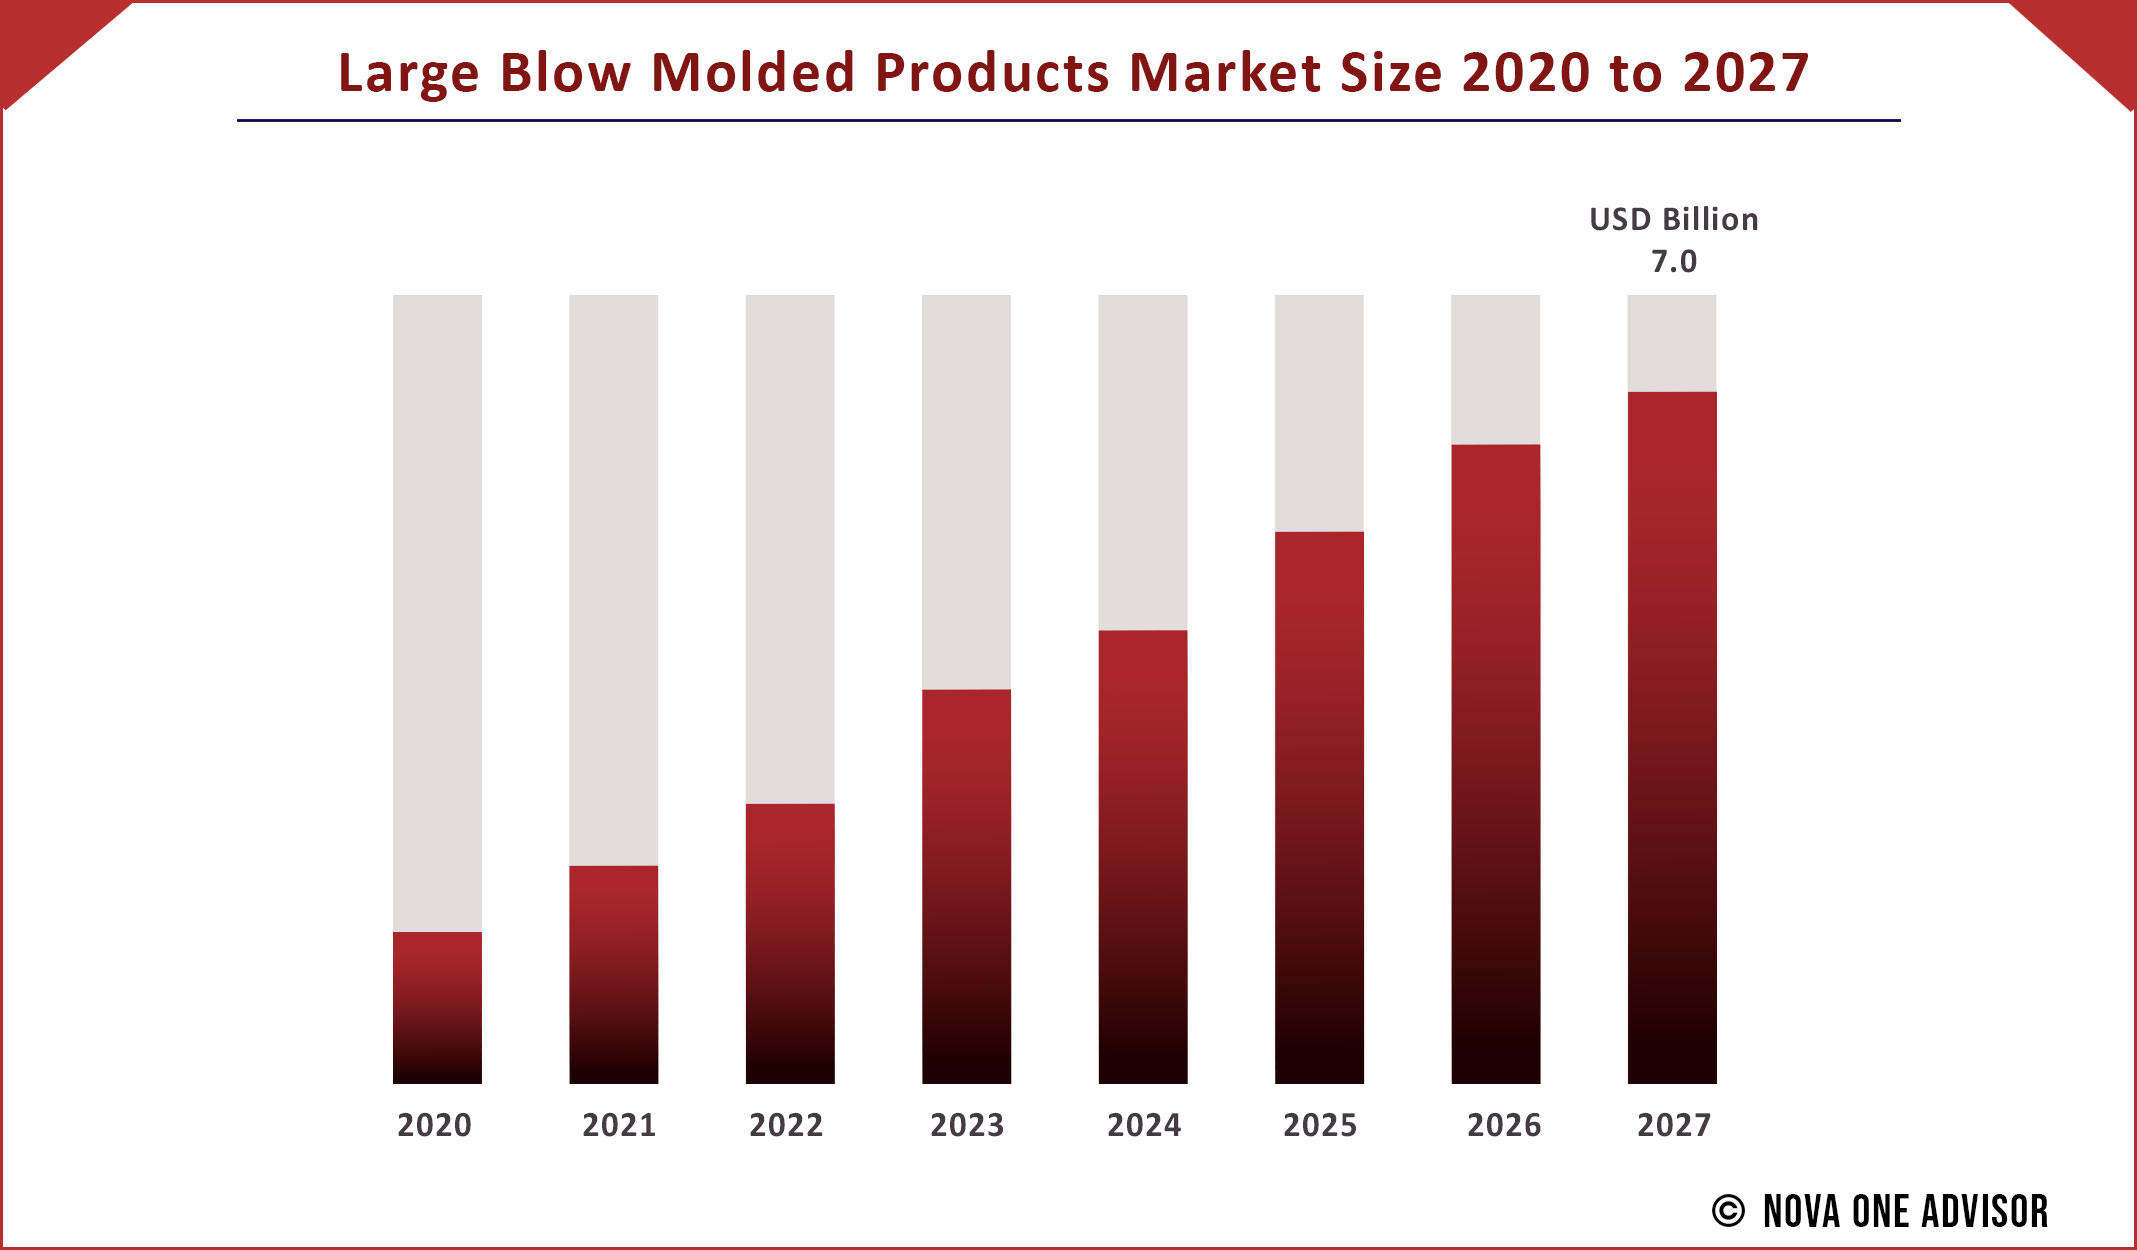 Large Blow Molded Products Market Size 2020 to 2027